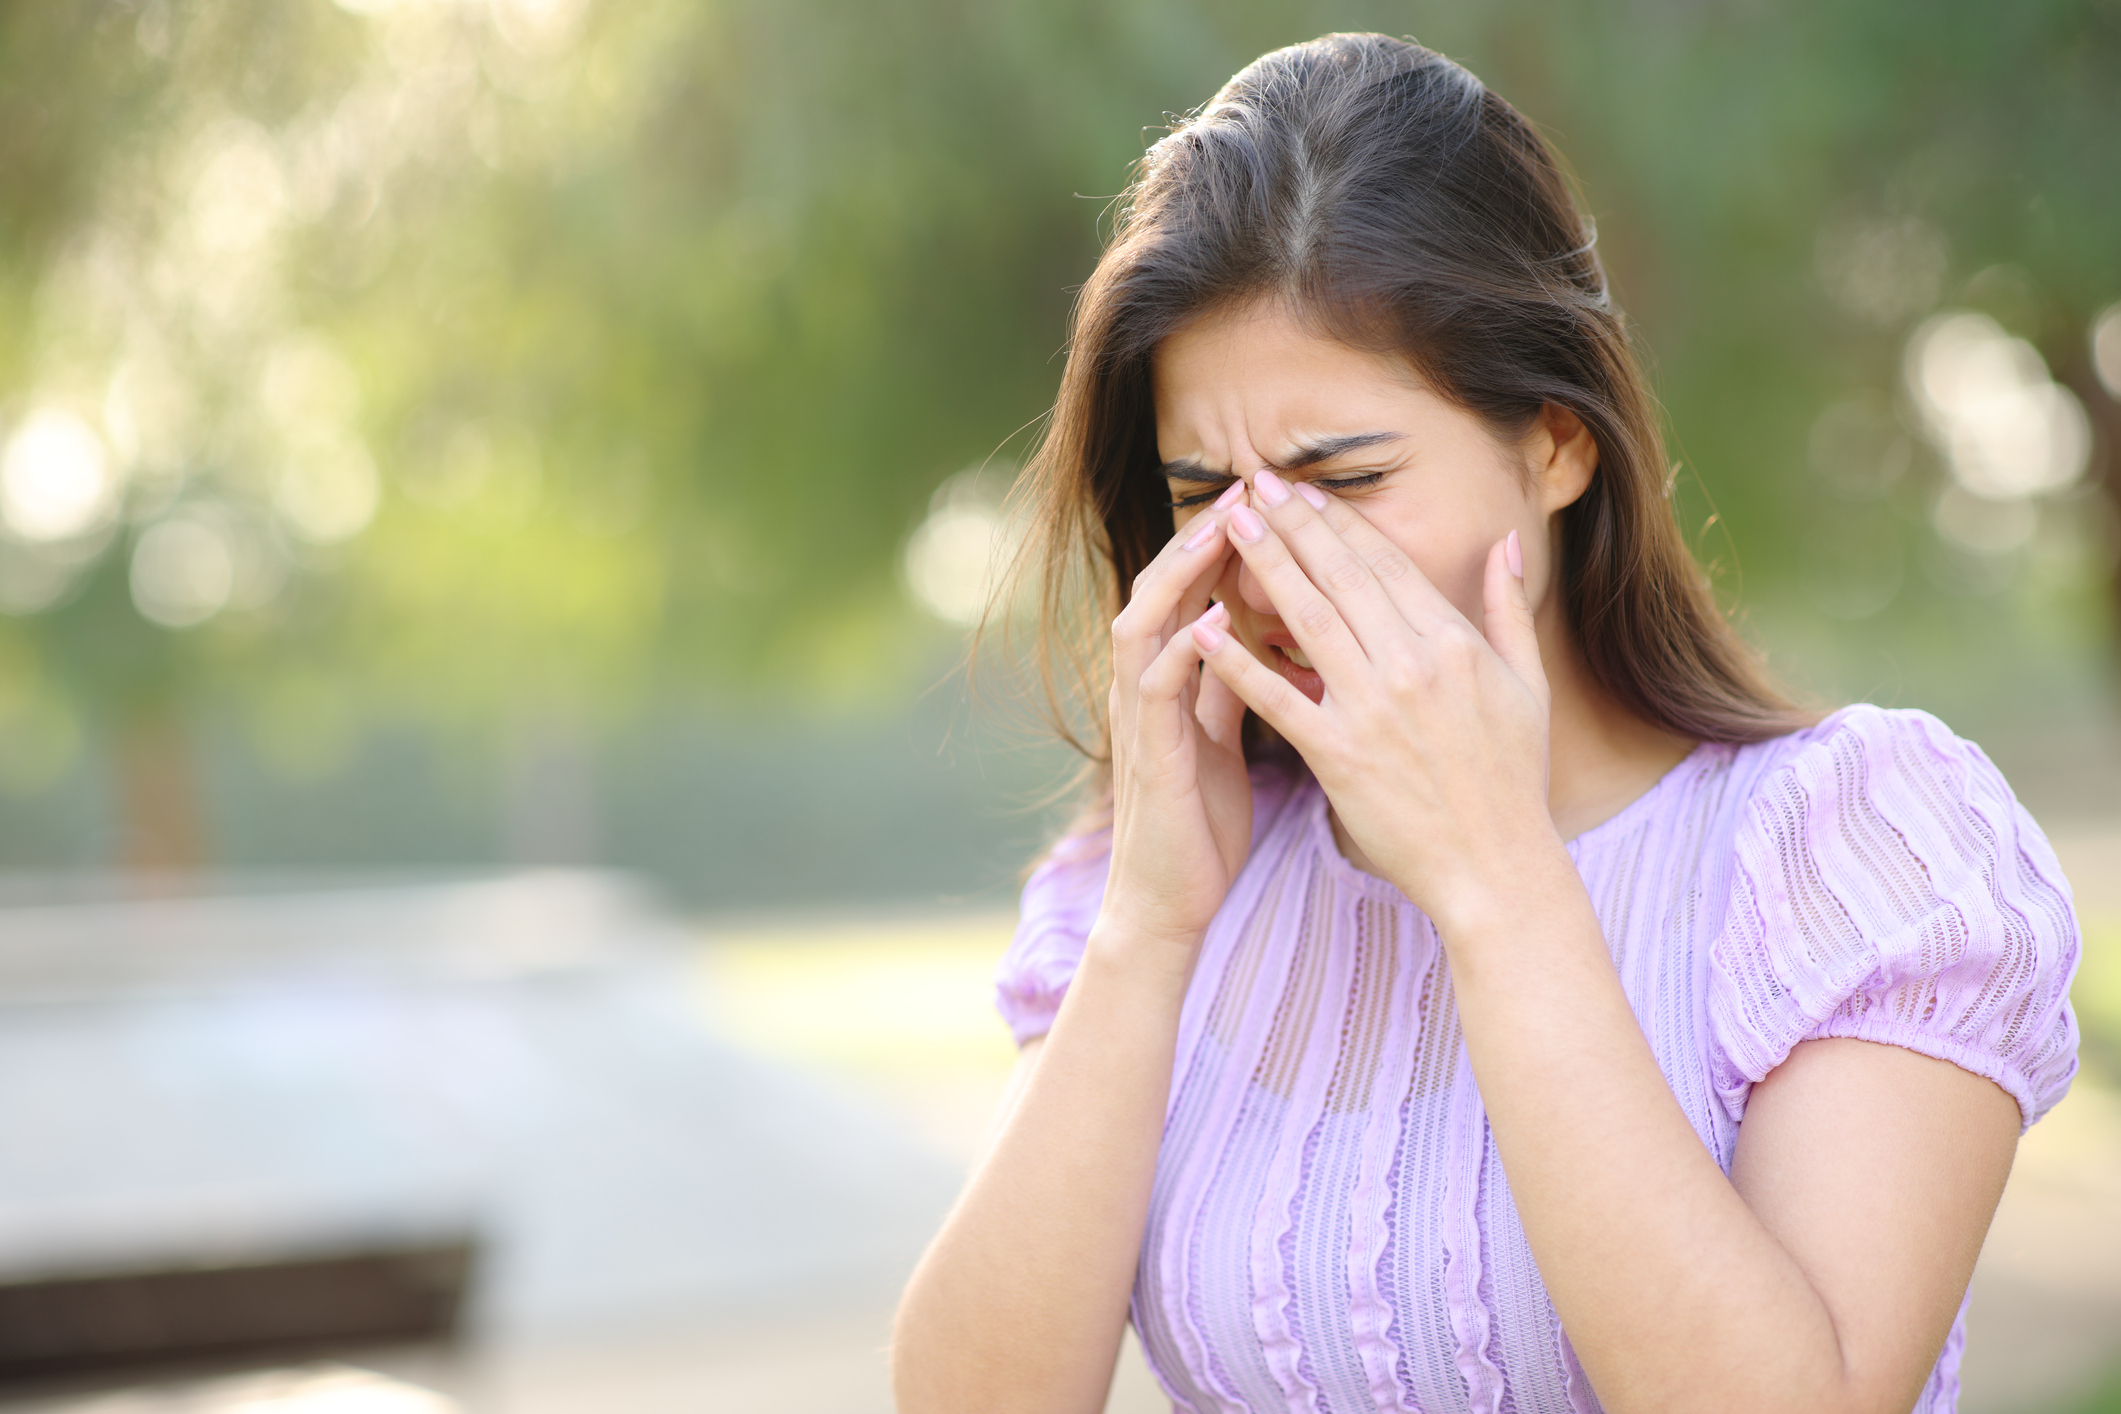 With spring in the air, Dr. Zeke McKinney gives us the scoop on allergy season!